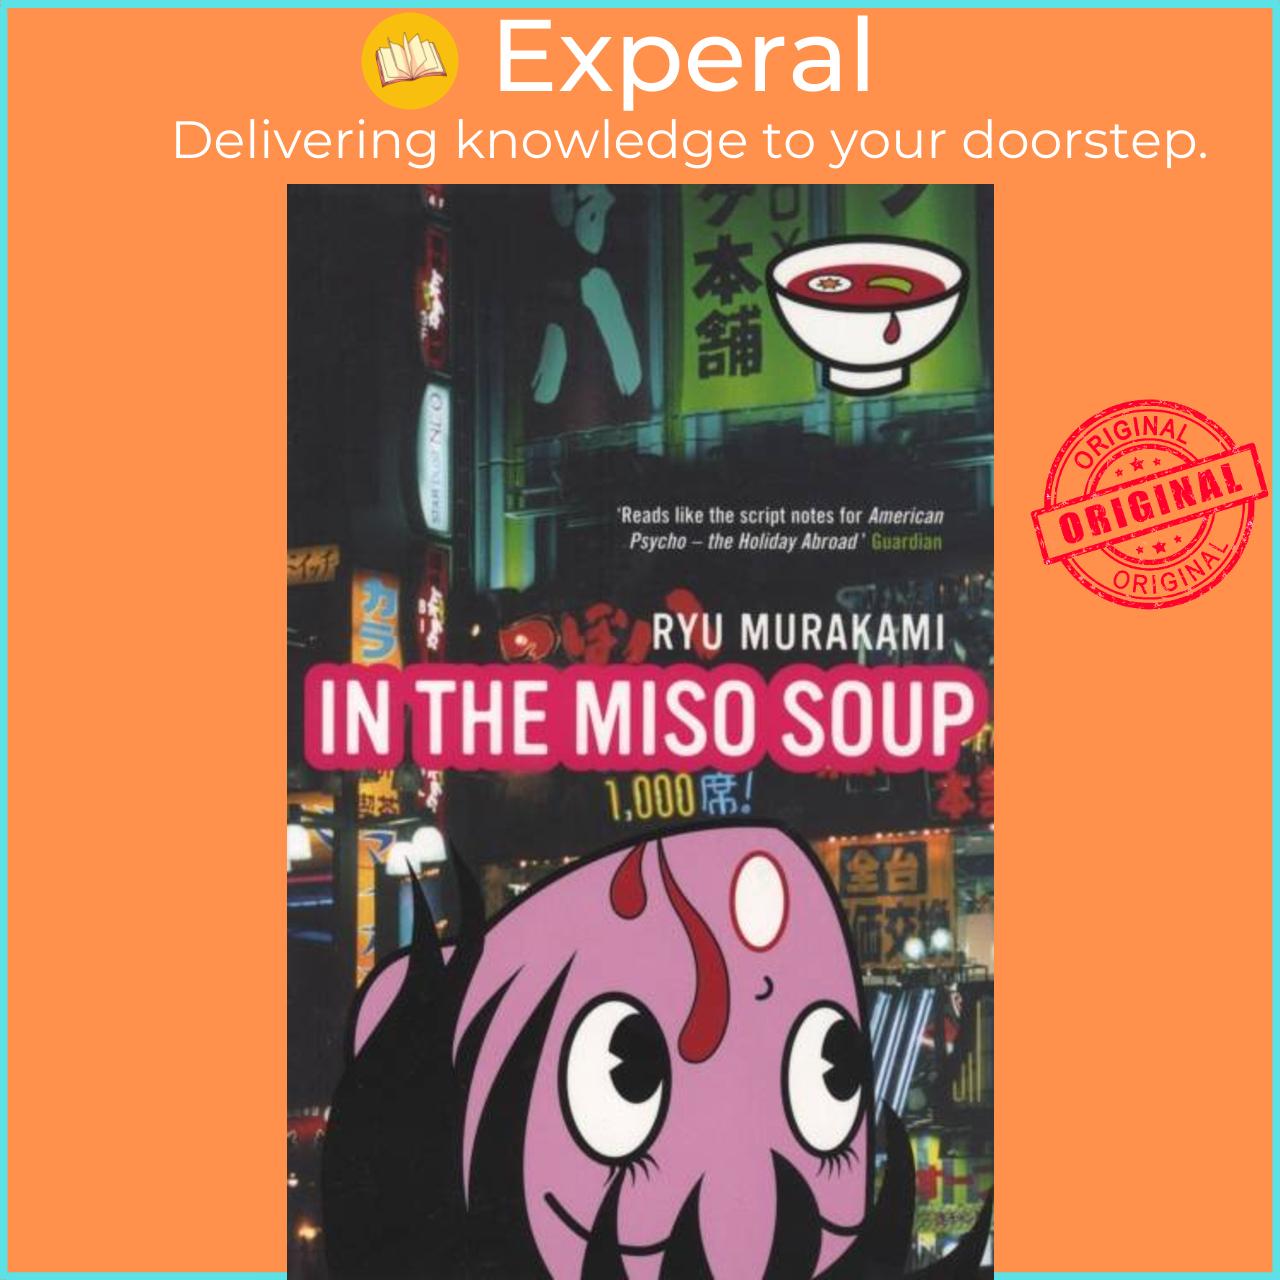 Sách - In The Miso Soup by Ralph F. McCarthy (UK edition, paperback)